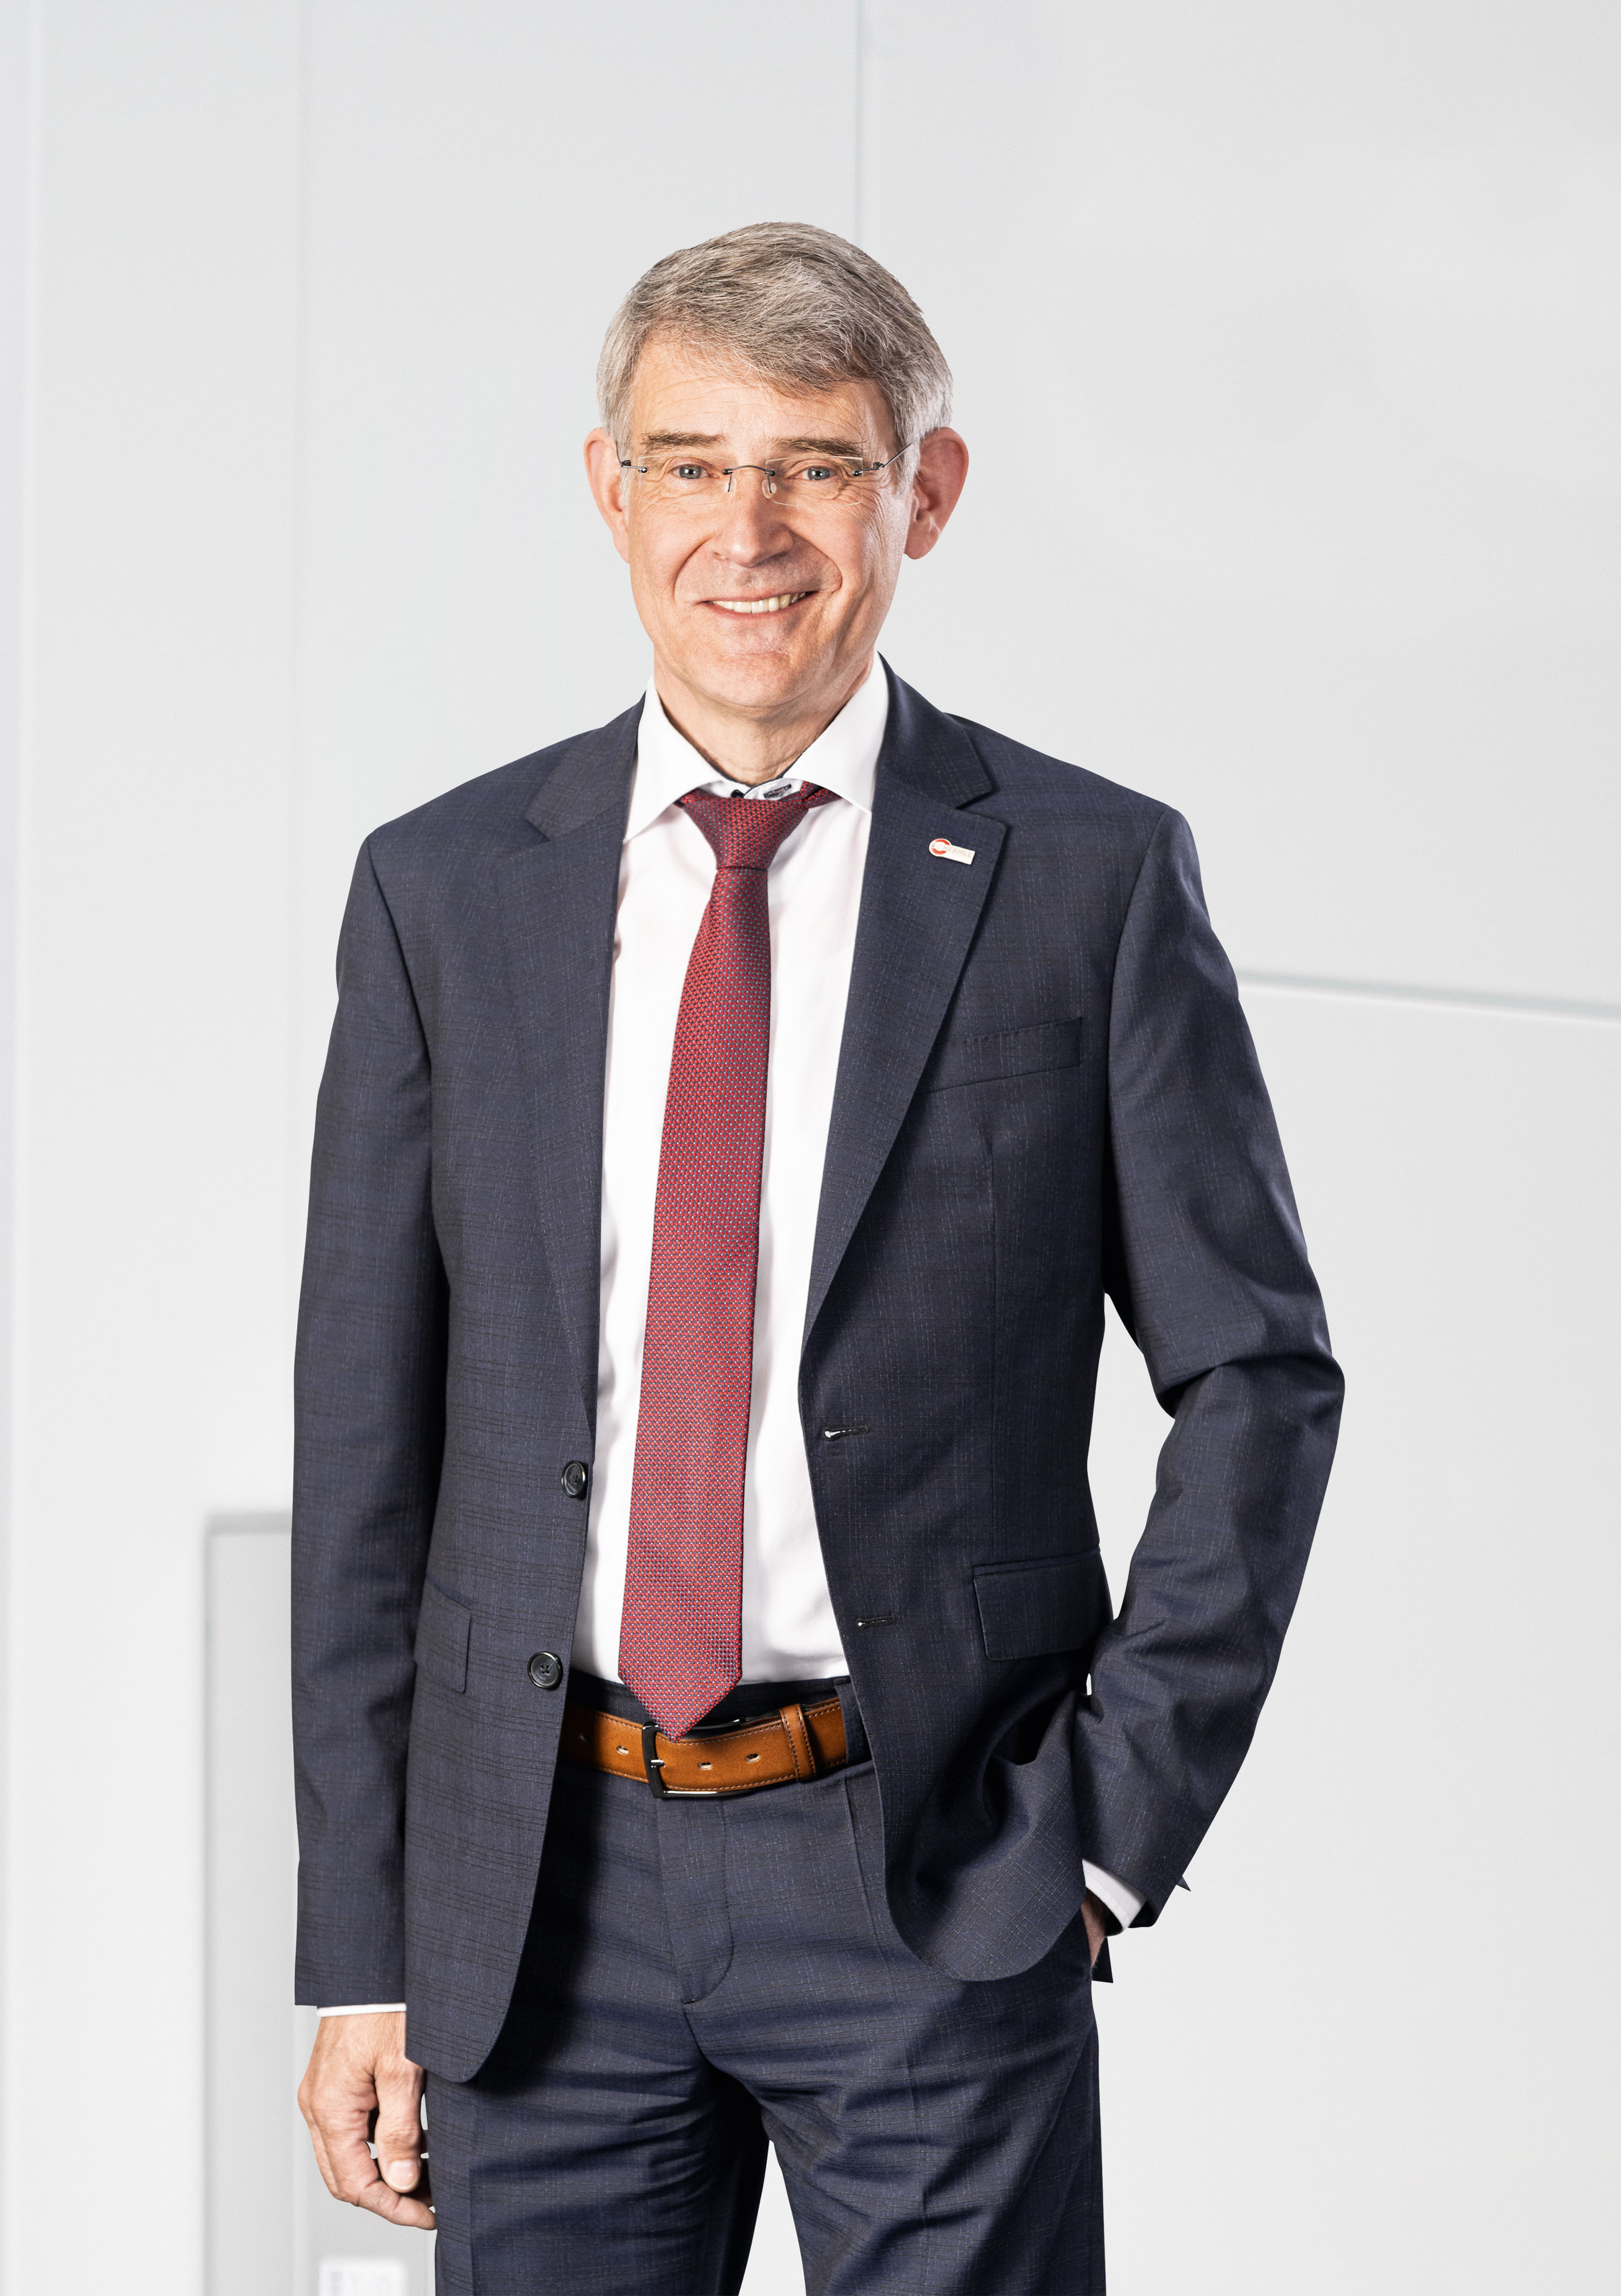 Franz-Xaver Bernhard, Member of the Board, Sales, Research and Development Hermle AG is the new VDW Chairman